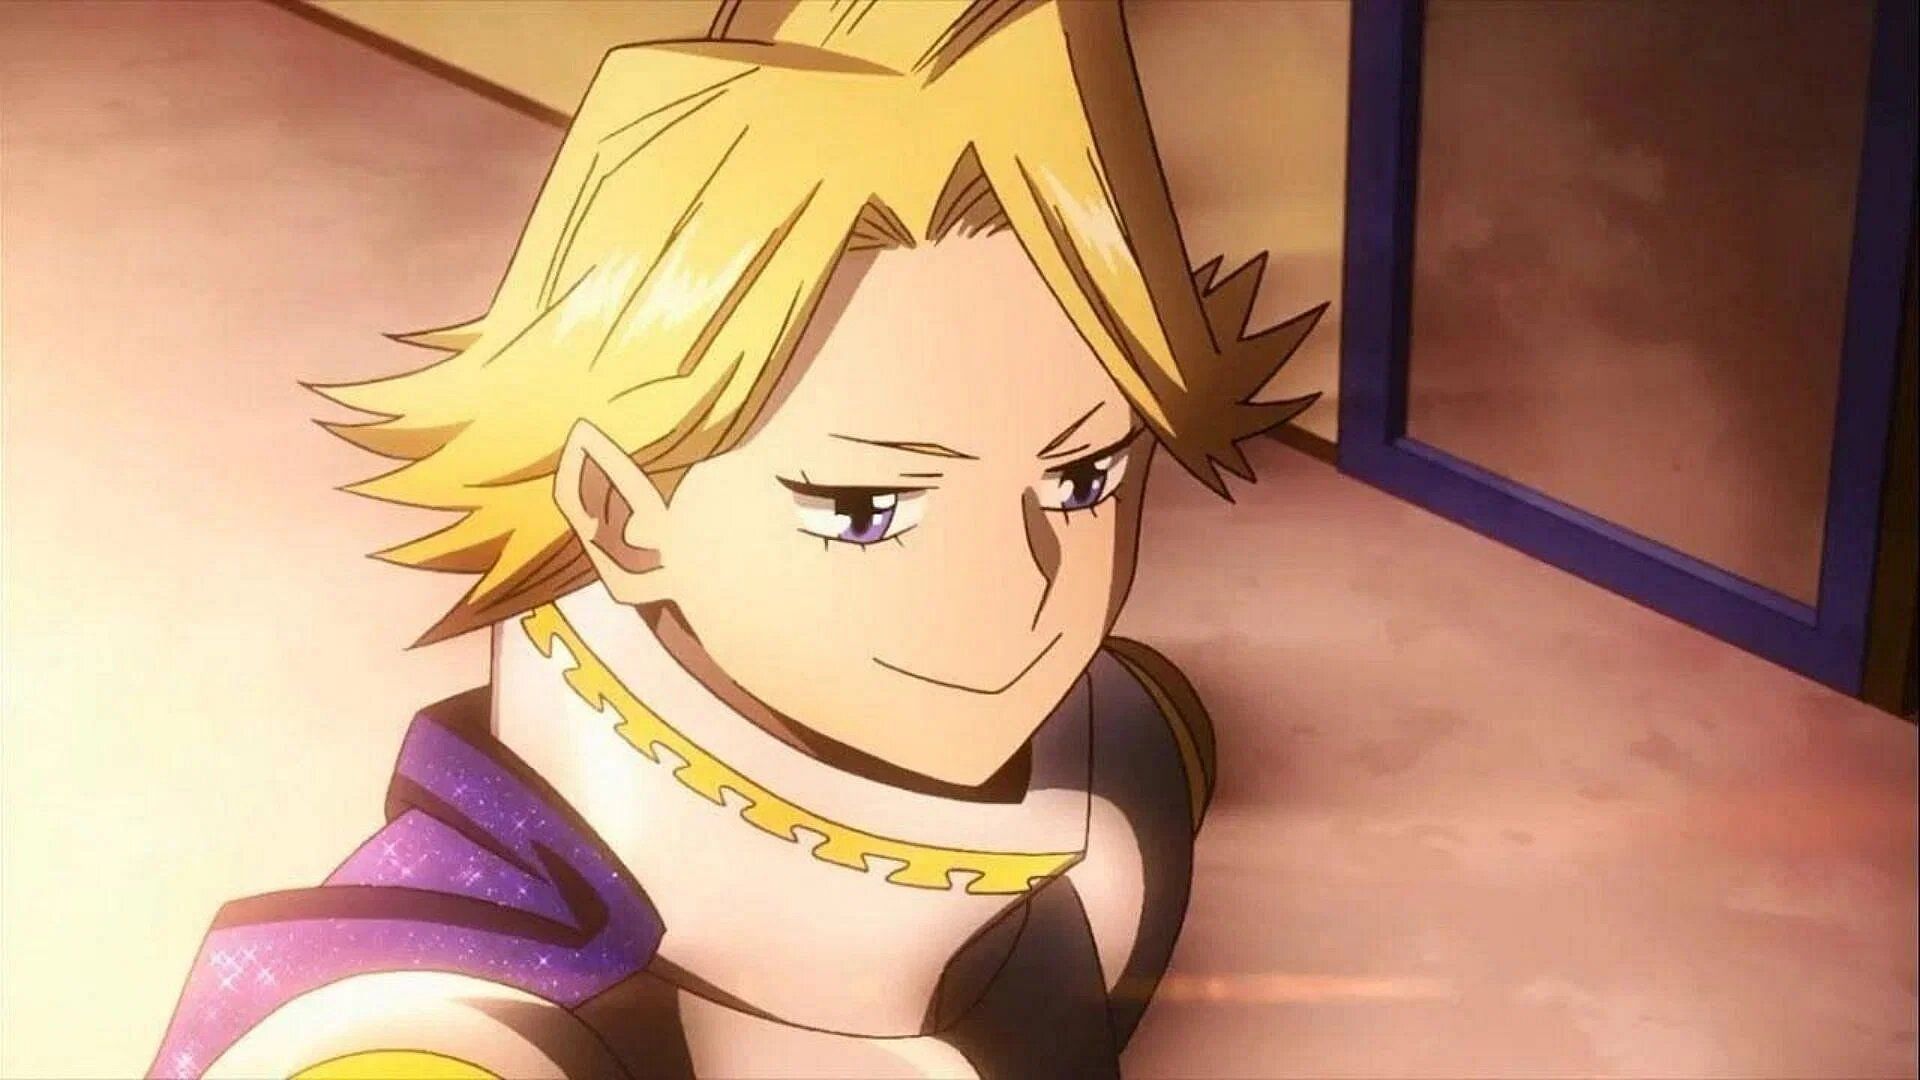 My Hero Academia and the recent discussions involving Aoyama